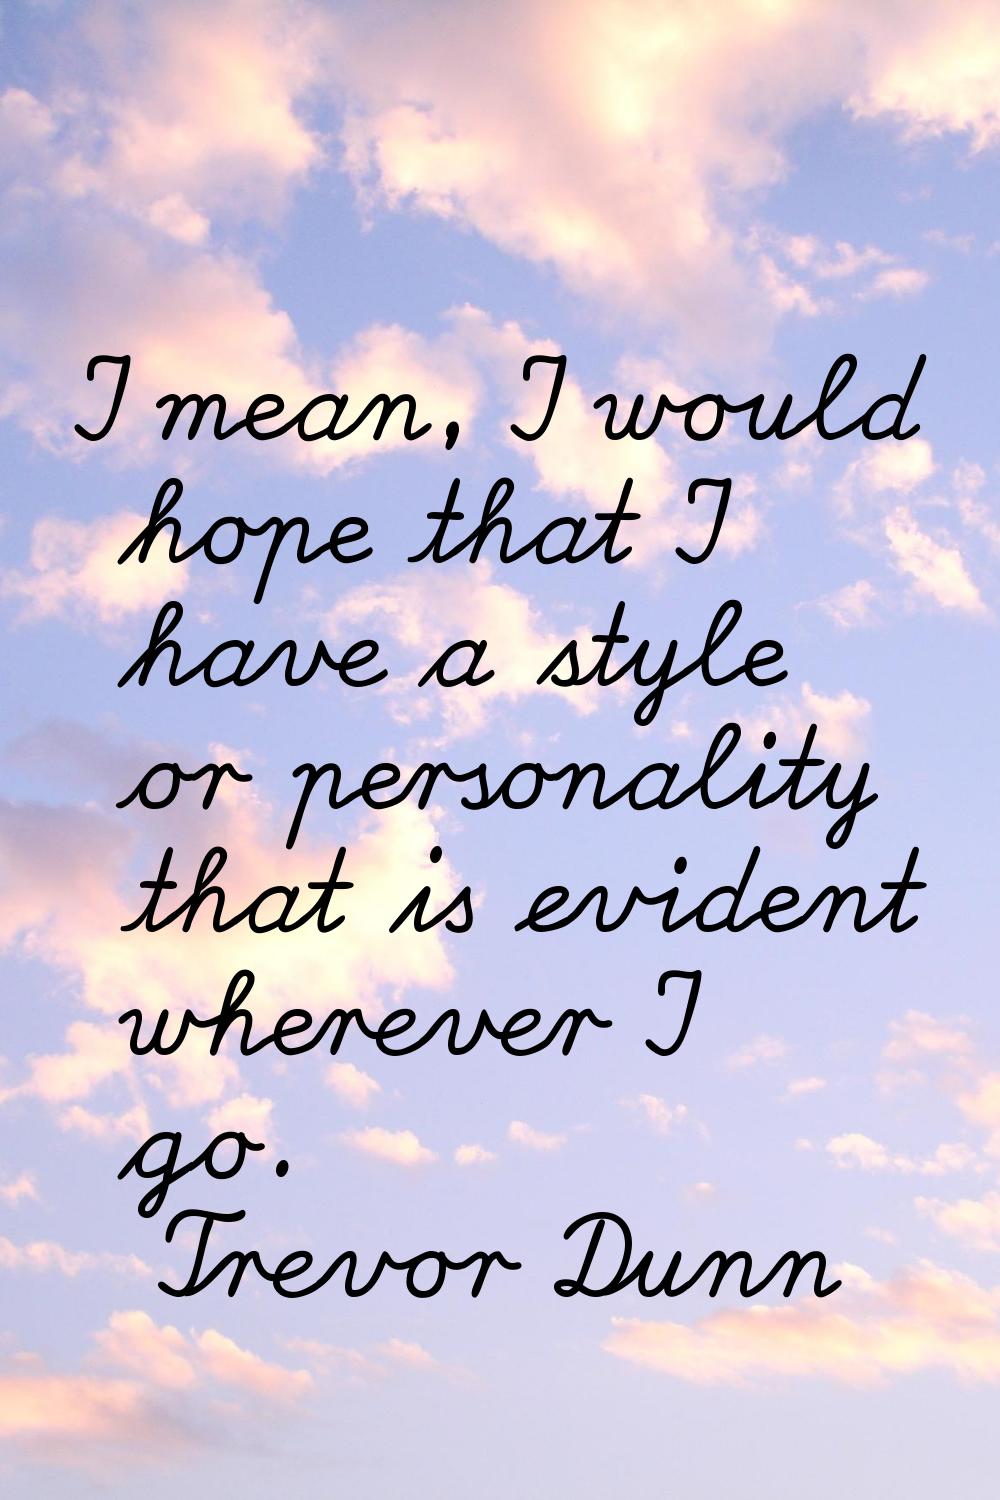 I mean, I would hope that I have a style or personality that is evident wherever I go.